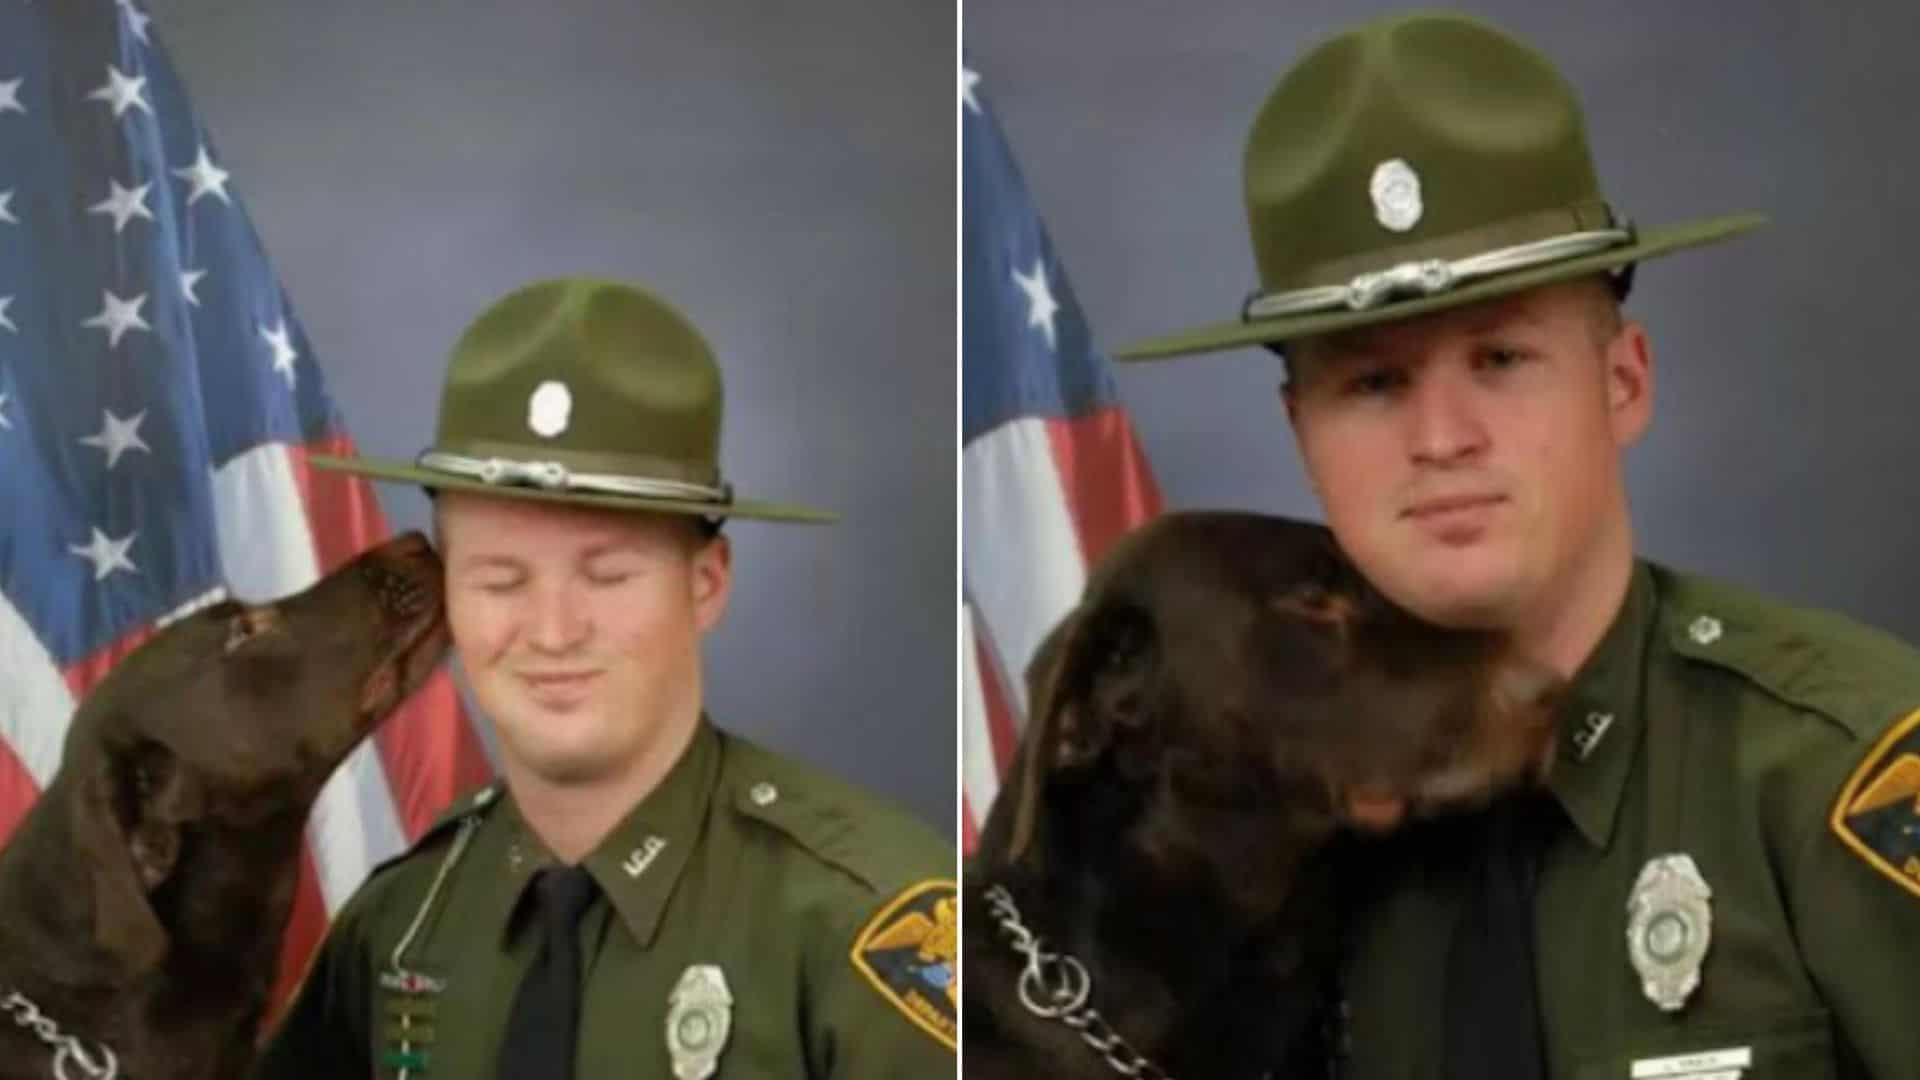 K9 Shows Affection To His Partner During The Official Department Photoshoot